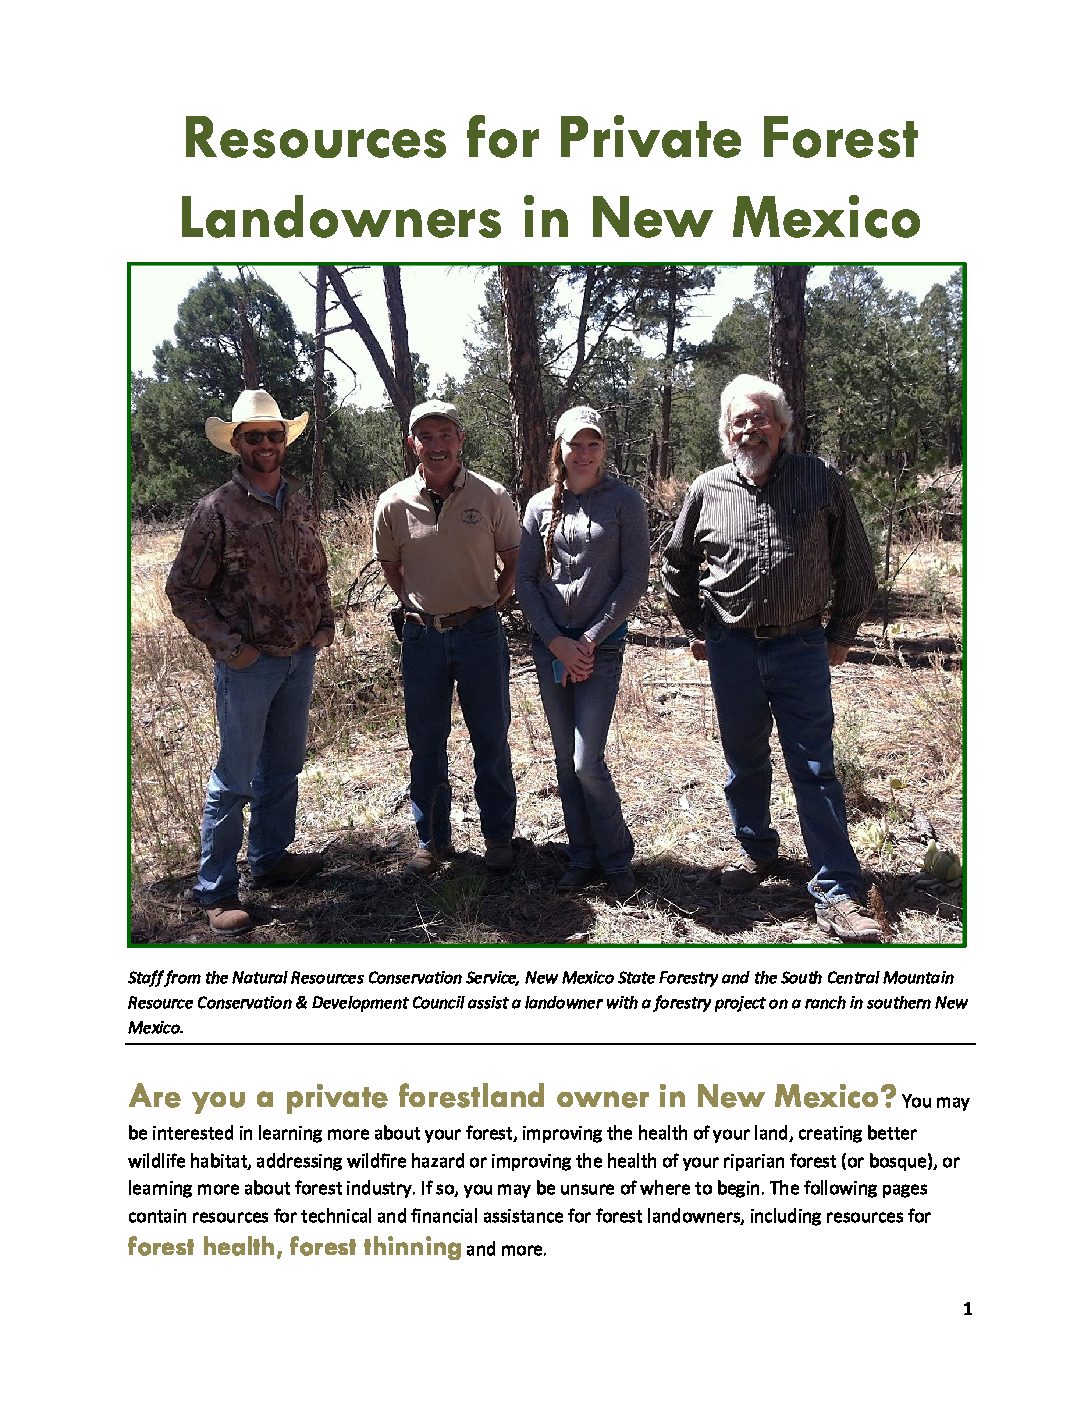 Resources for Private Forest Landowners in New Mexico